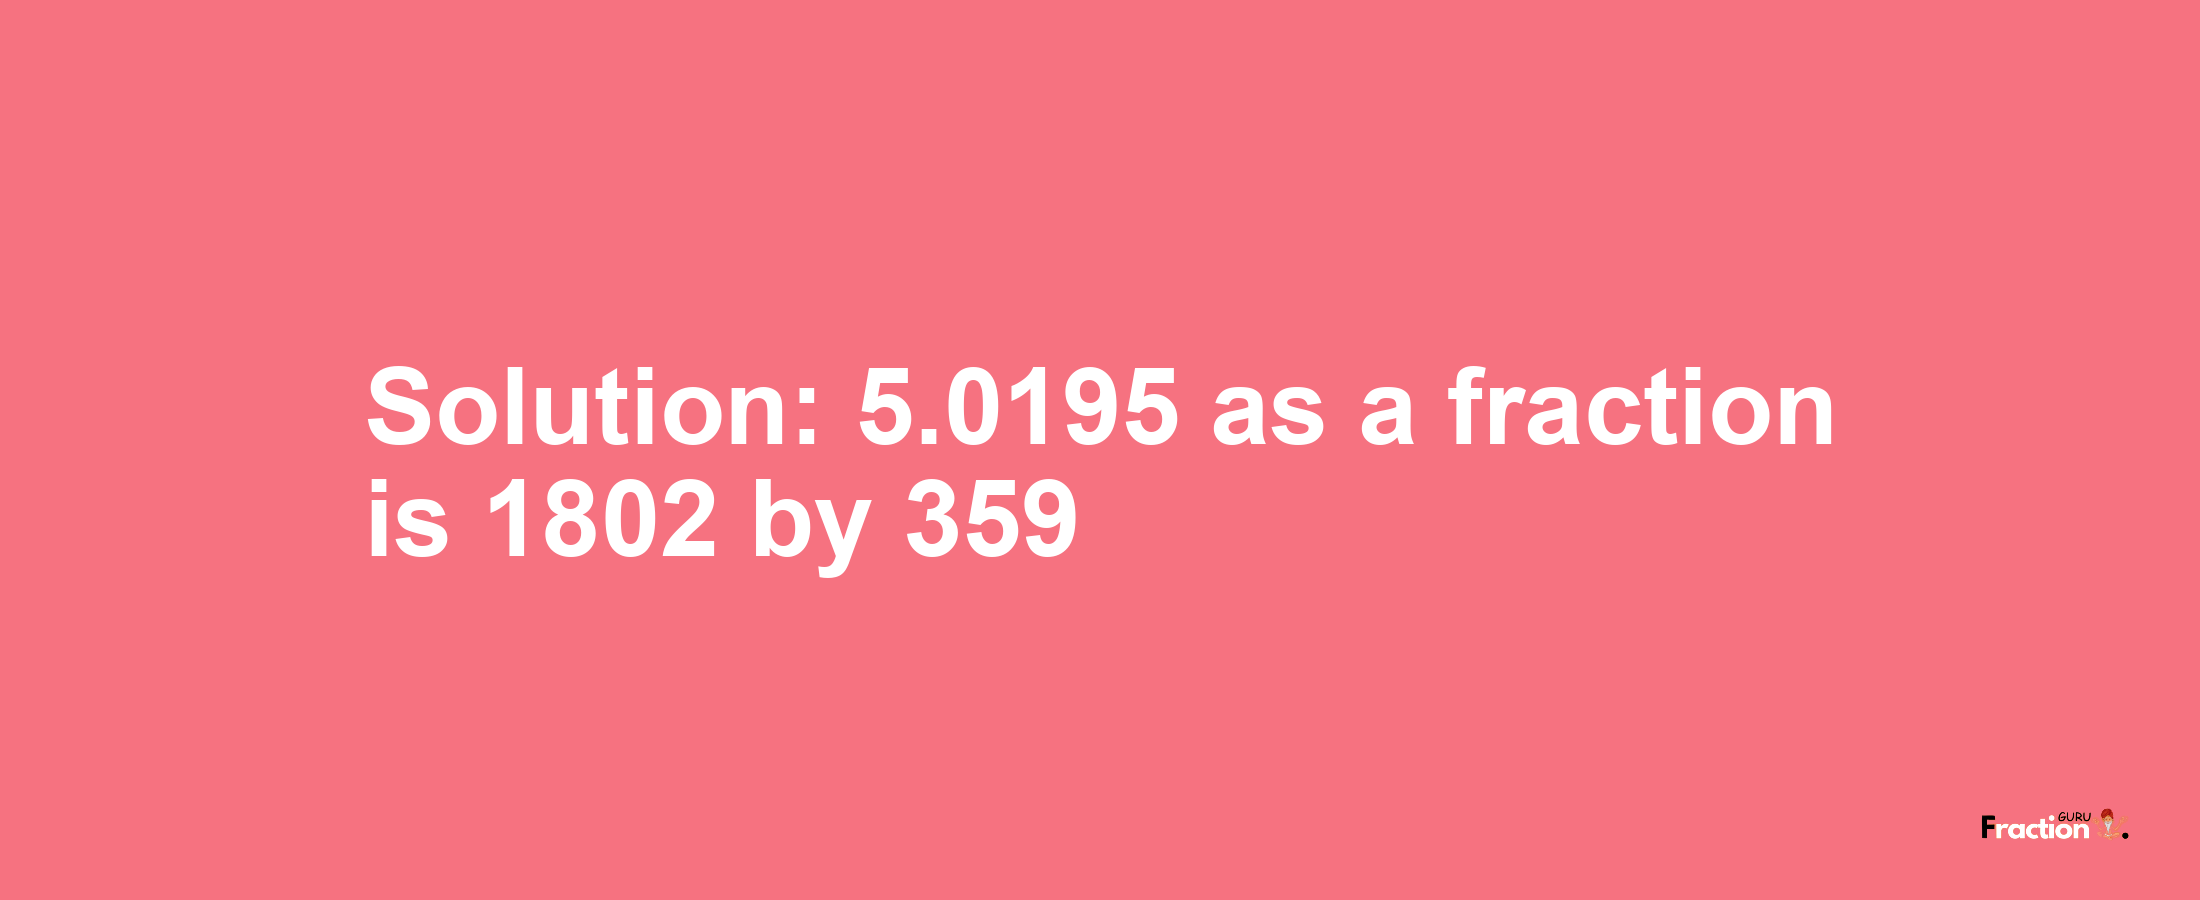 Solution:5.0195 as a fraction is 1802/359